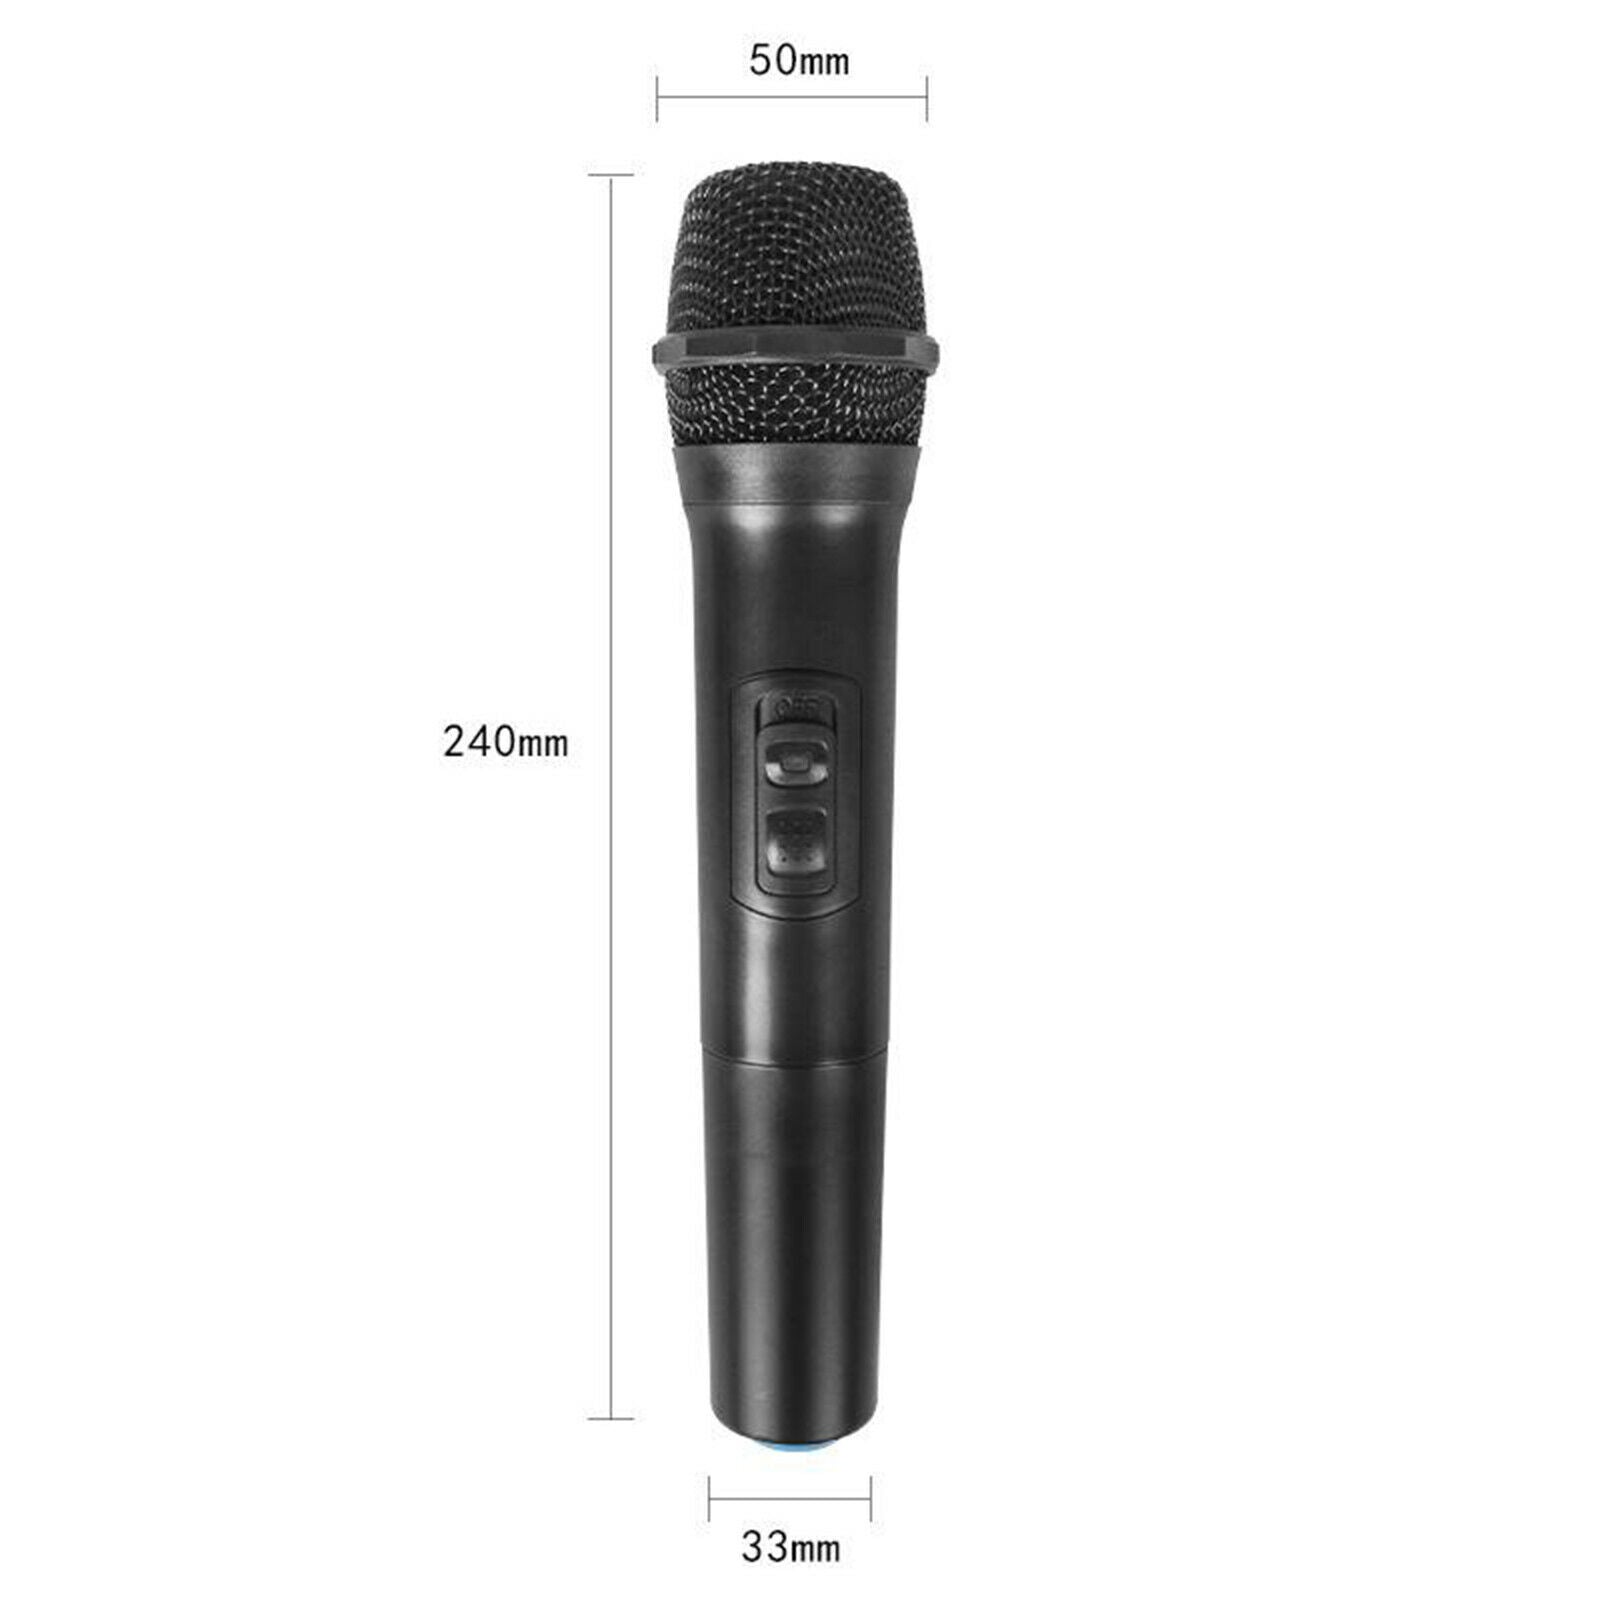 2x Cordless Handheld Microphone System for Home Karaoke, Meeting, Party, Speech,